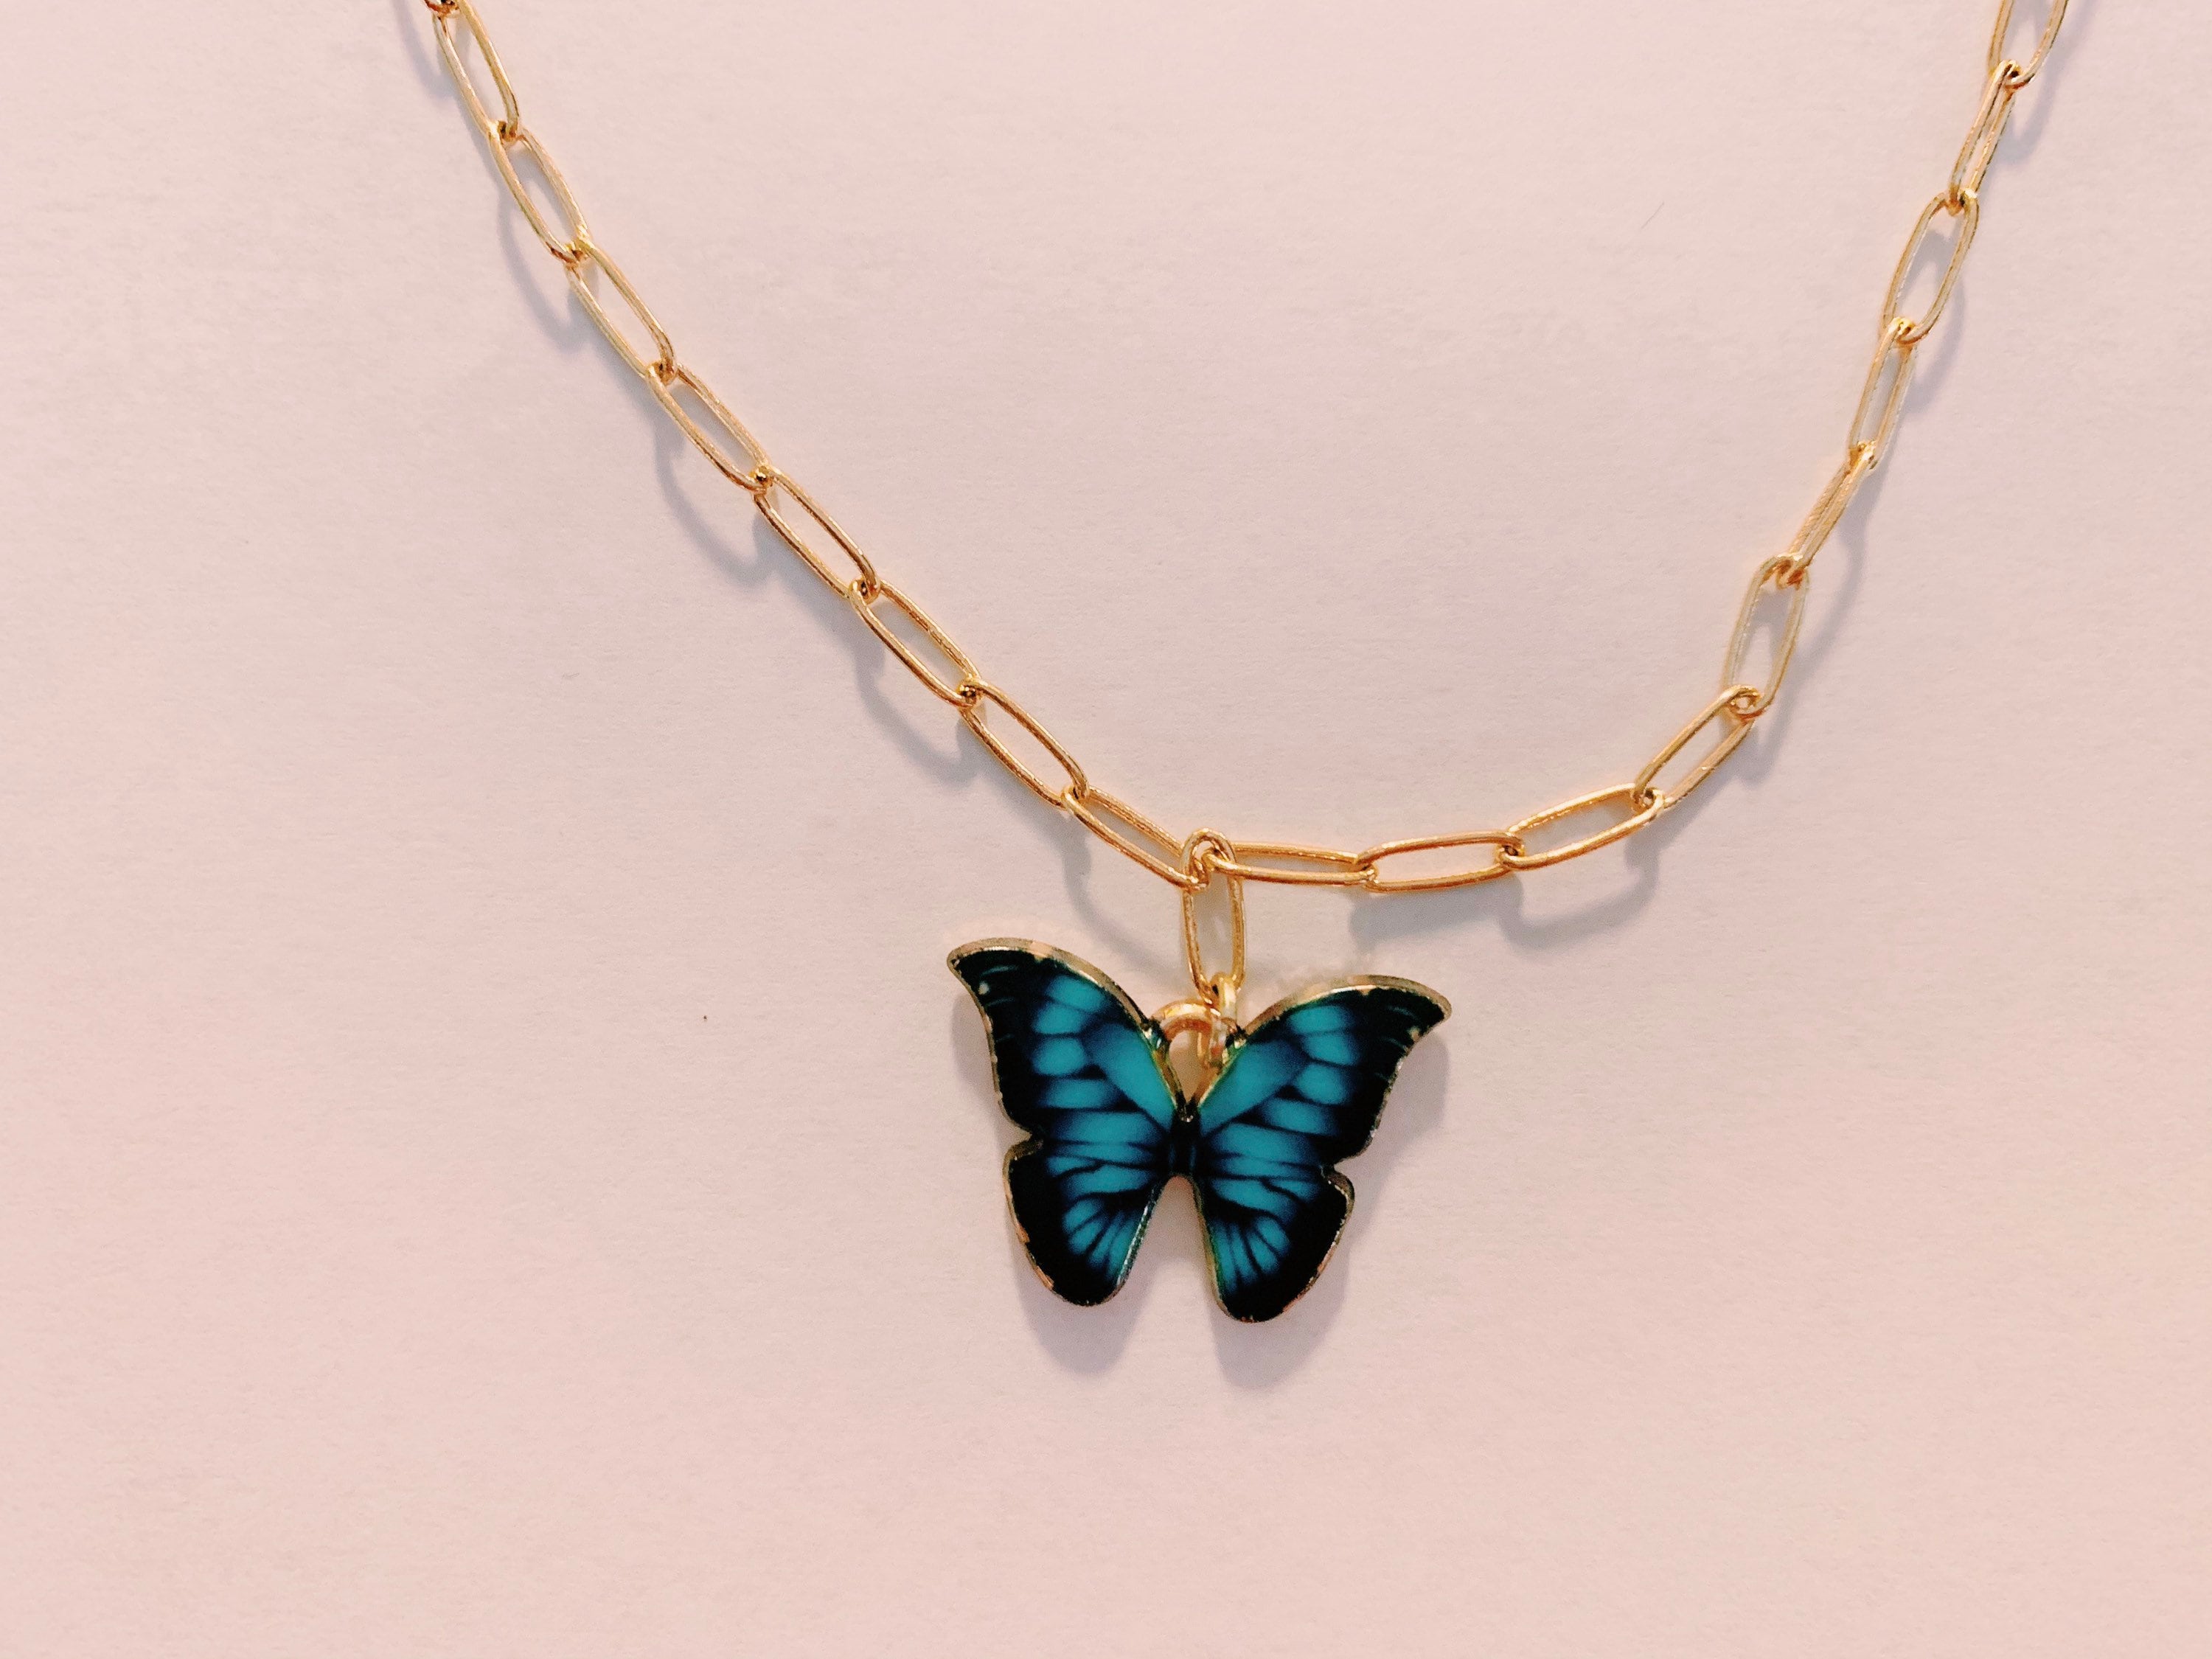 Butterfly Necklace Gold Butterfly Necklace Monarch | Etsy